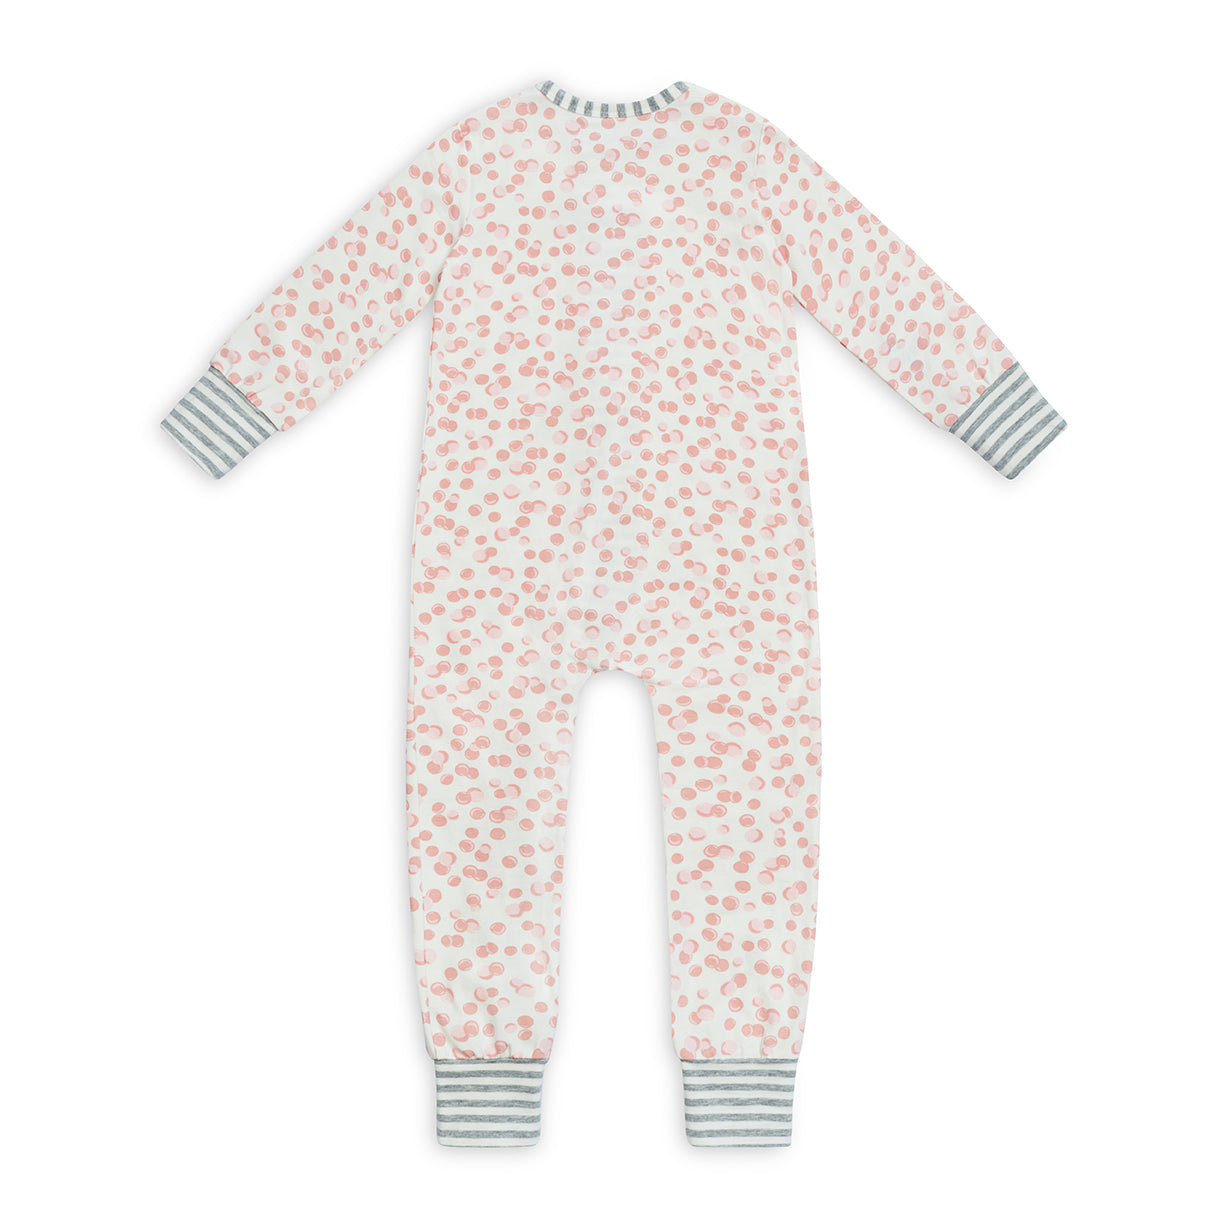 Footless Romper - Bubbles Dusty Pink Love To Dream South Africa